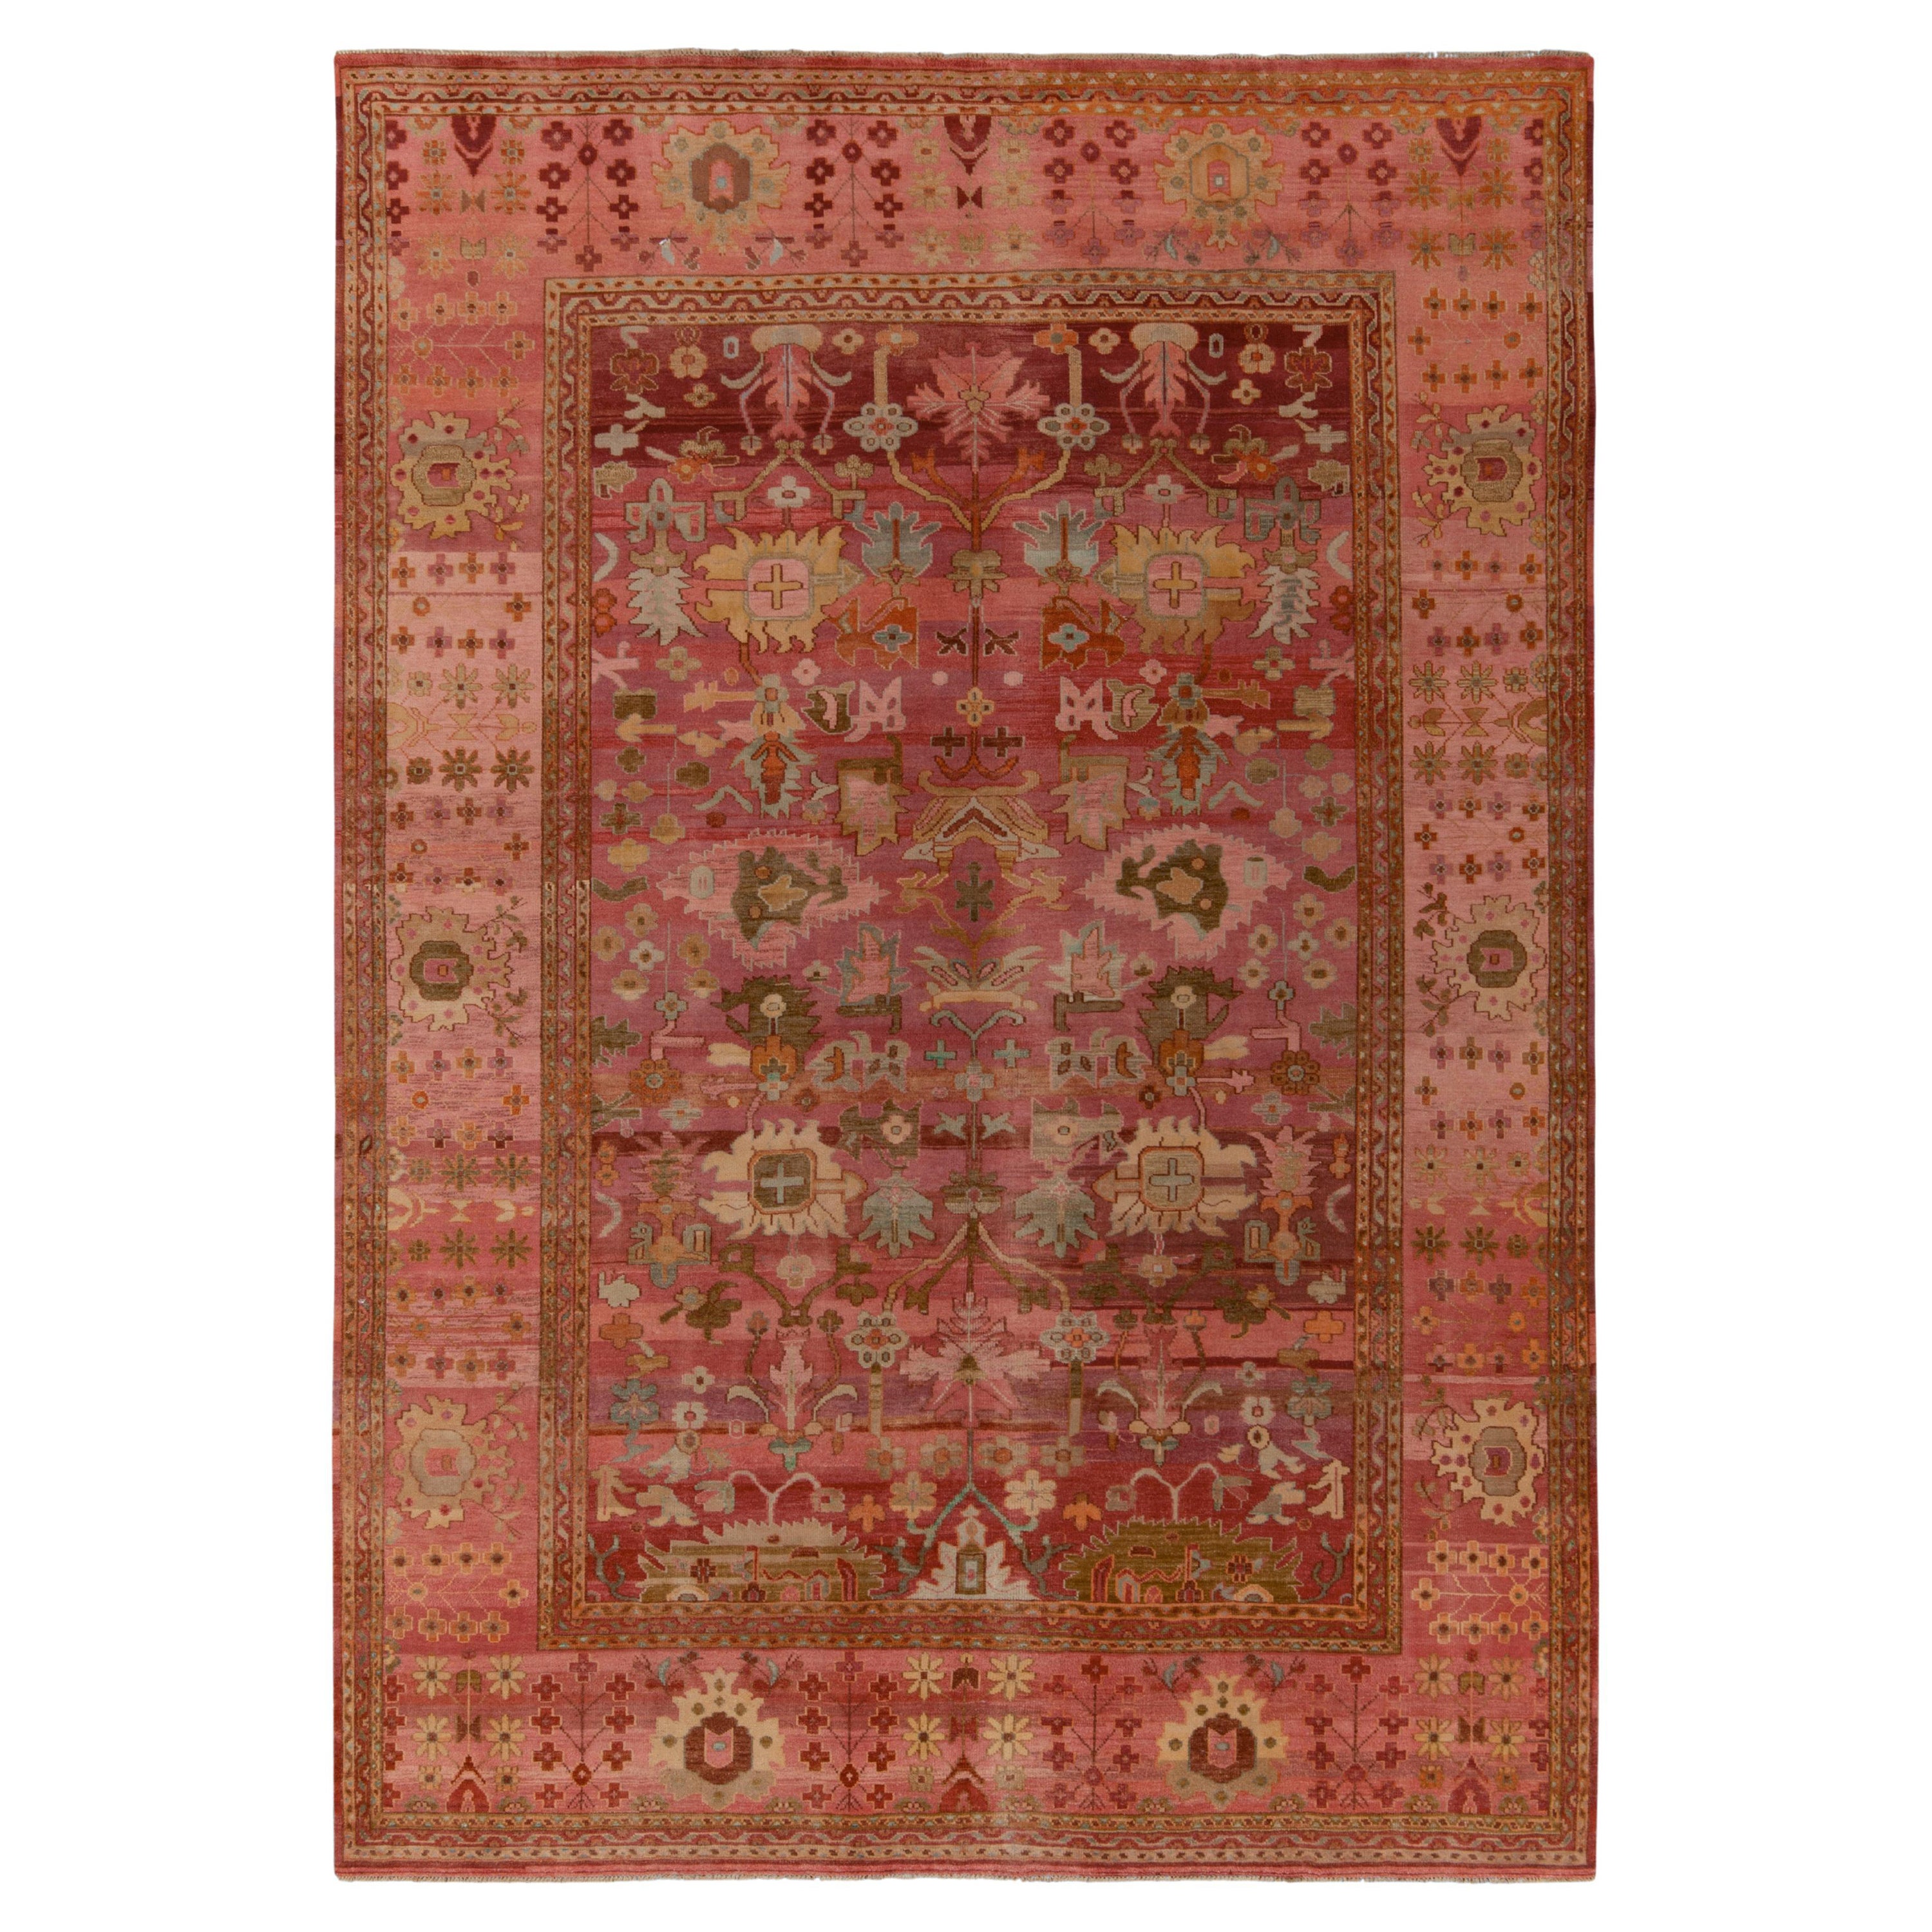 Rug & Kilim’s Classic Style Silk Rug in Pink, Beige-Brown Floral Pattern For Sale